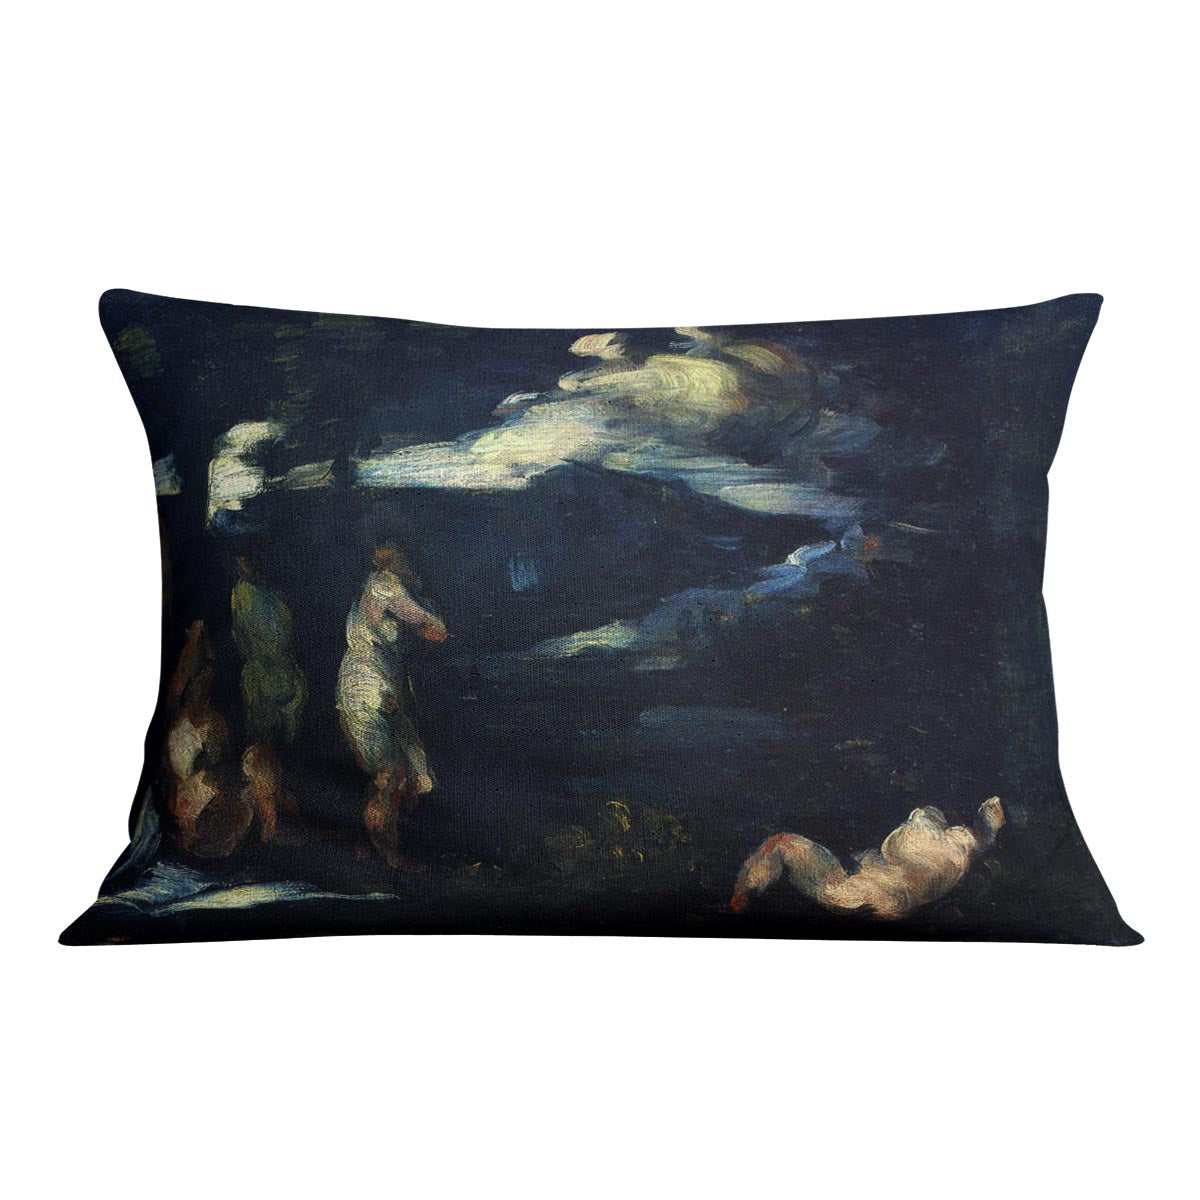 More Bathers by Cezanne Cushion